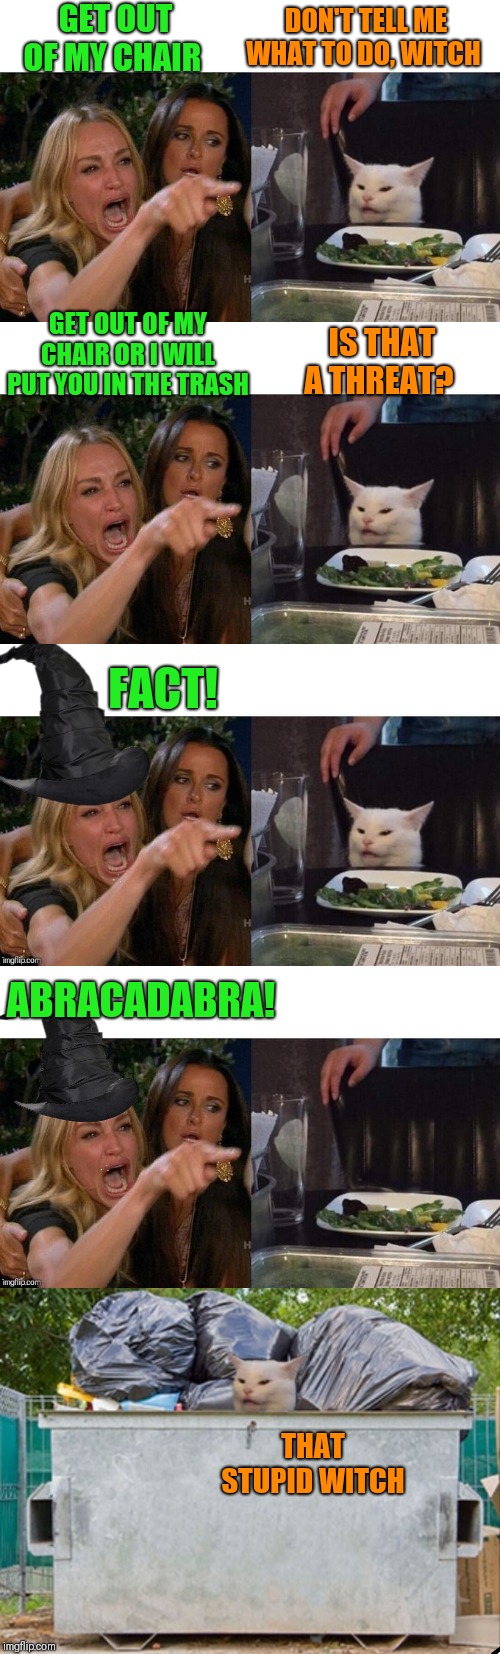 A true witch... ;) | GET OUT OF MY CHAIR; DON'T TELL ME WHAT TO DO, WITCH; GET OUT OF MY CHAIR OR I WILL PUT YOU IN THE TRASH; IS THAT A THREAT? FACT! ABRACADABRA! THAT STUPID WITCH | image tagged in memes,woman yelling at cat,44colt,witch,dumpster,food | made w/ Imgflip meme maker